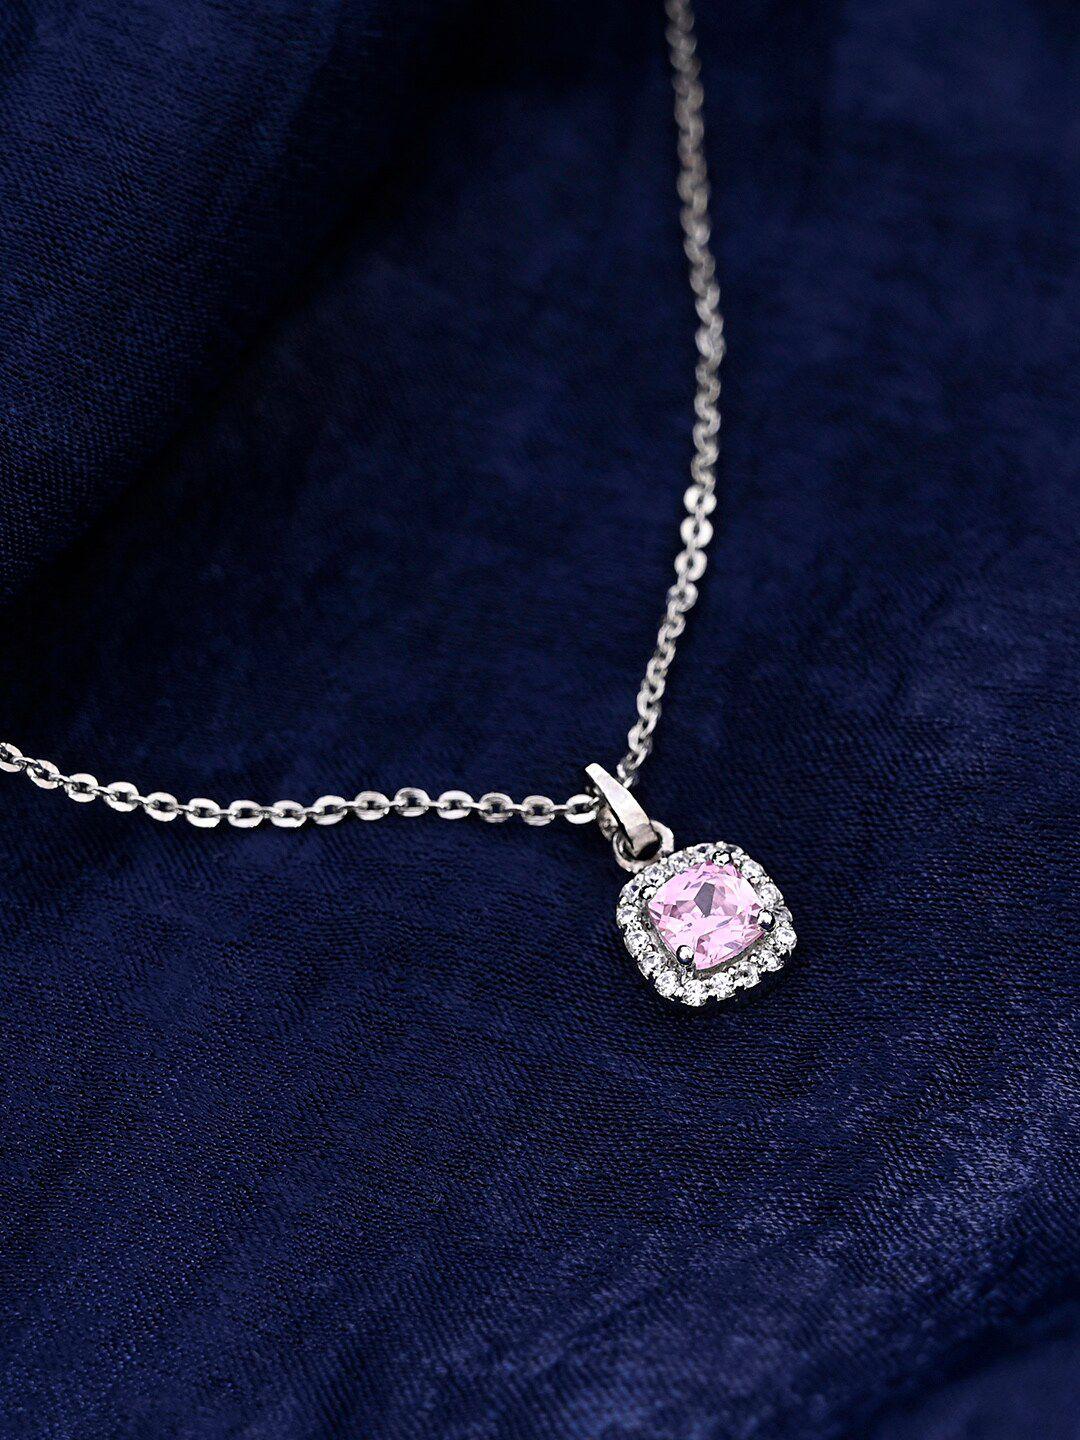 mikoto by fablestreet 925 sterling silver rhodium-plated pink zircon handcrafted chain